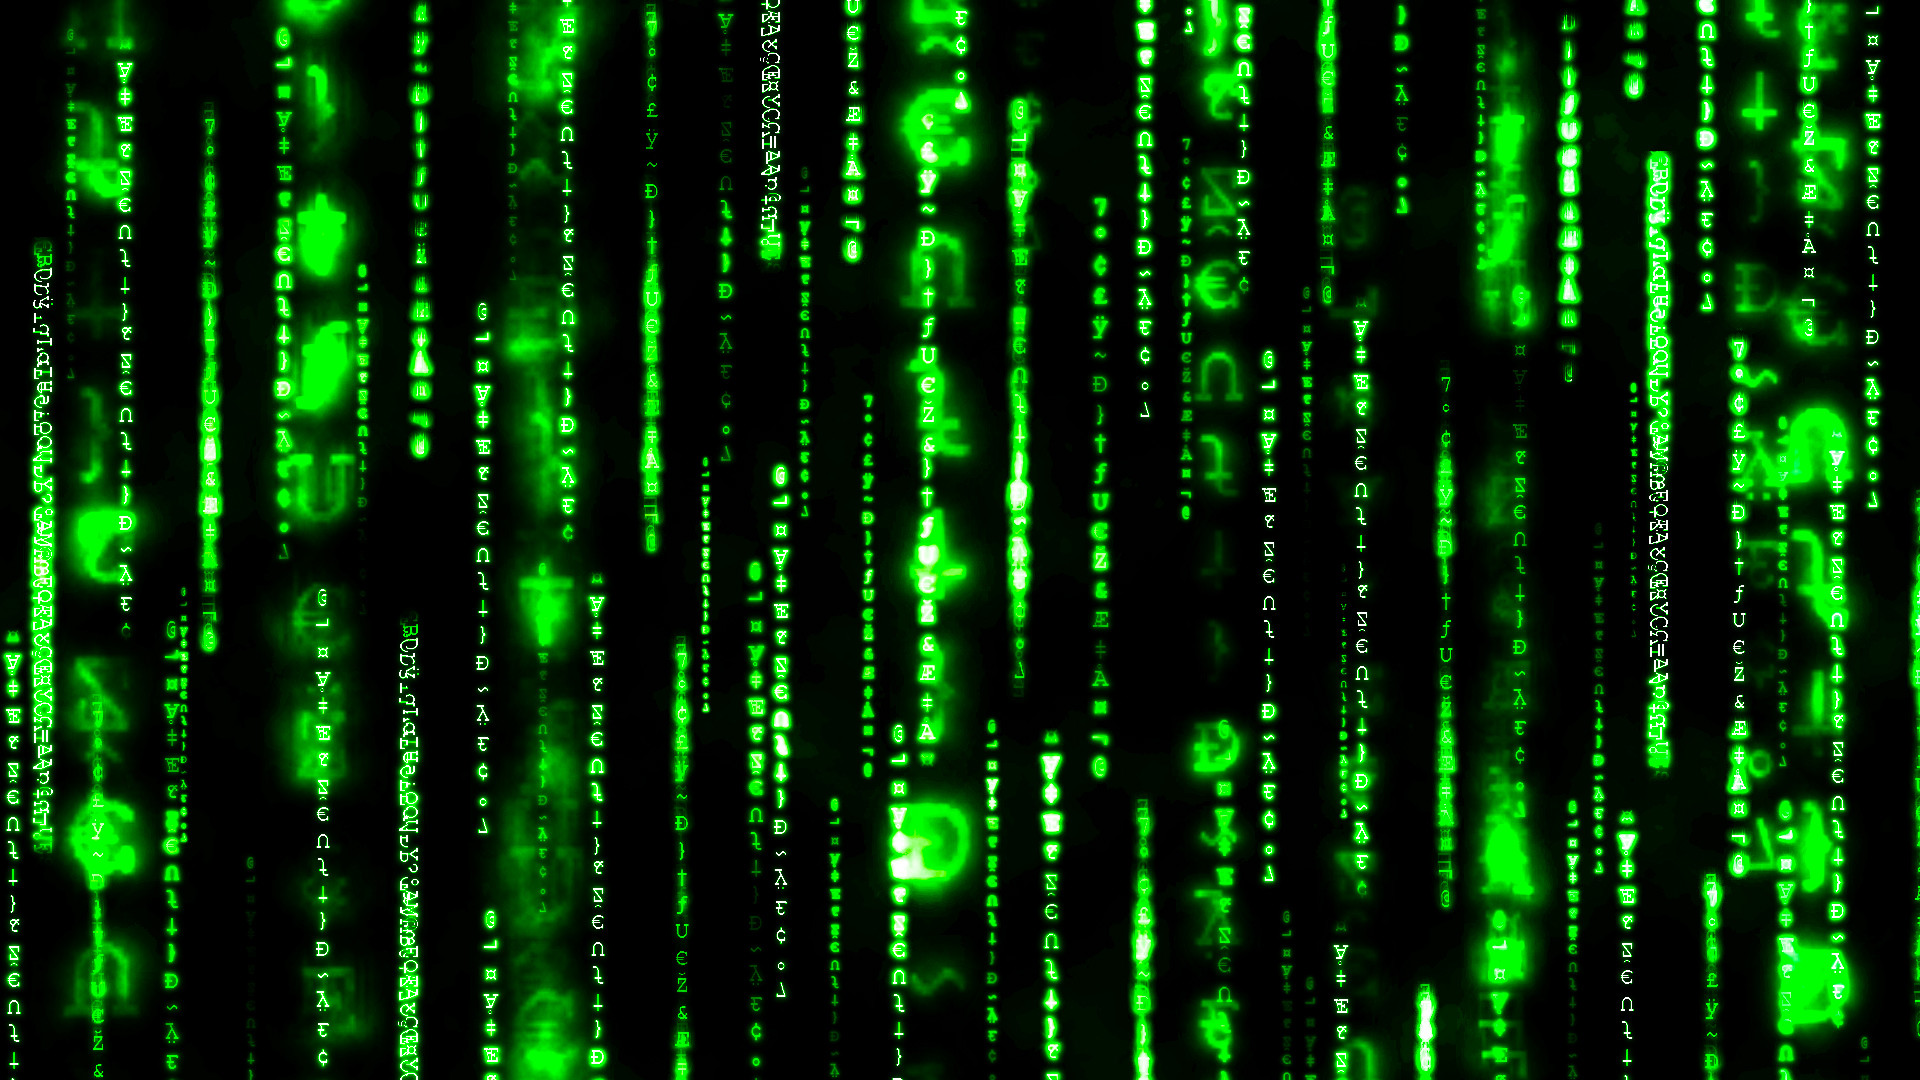 Moving Binary Code Wallpaper (62+ images)